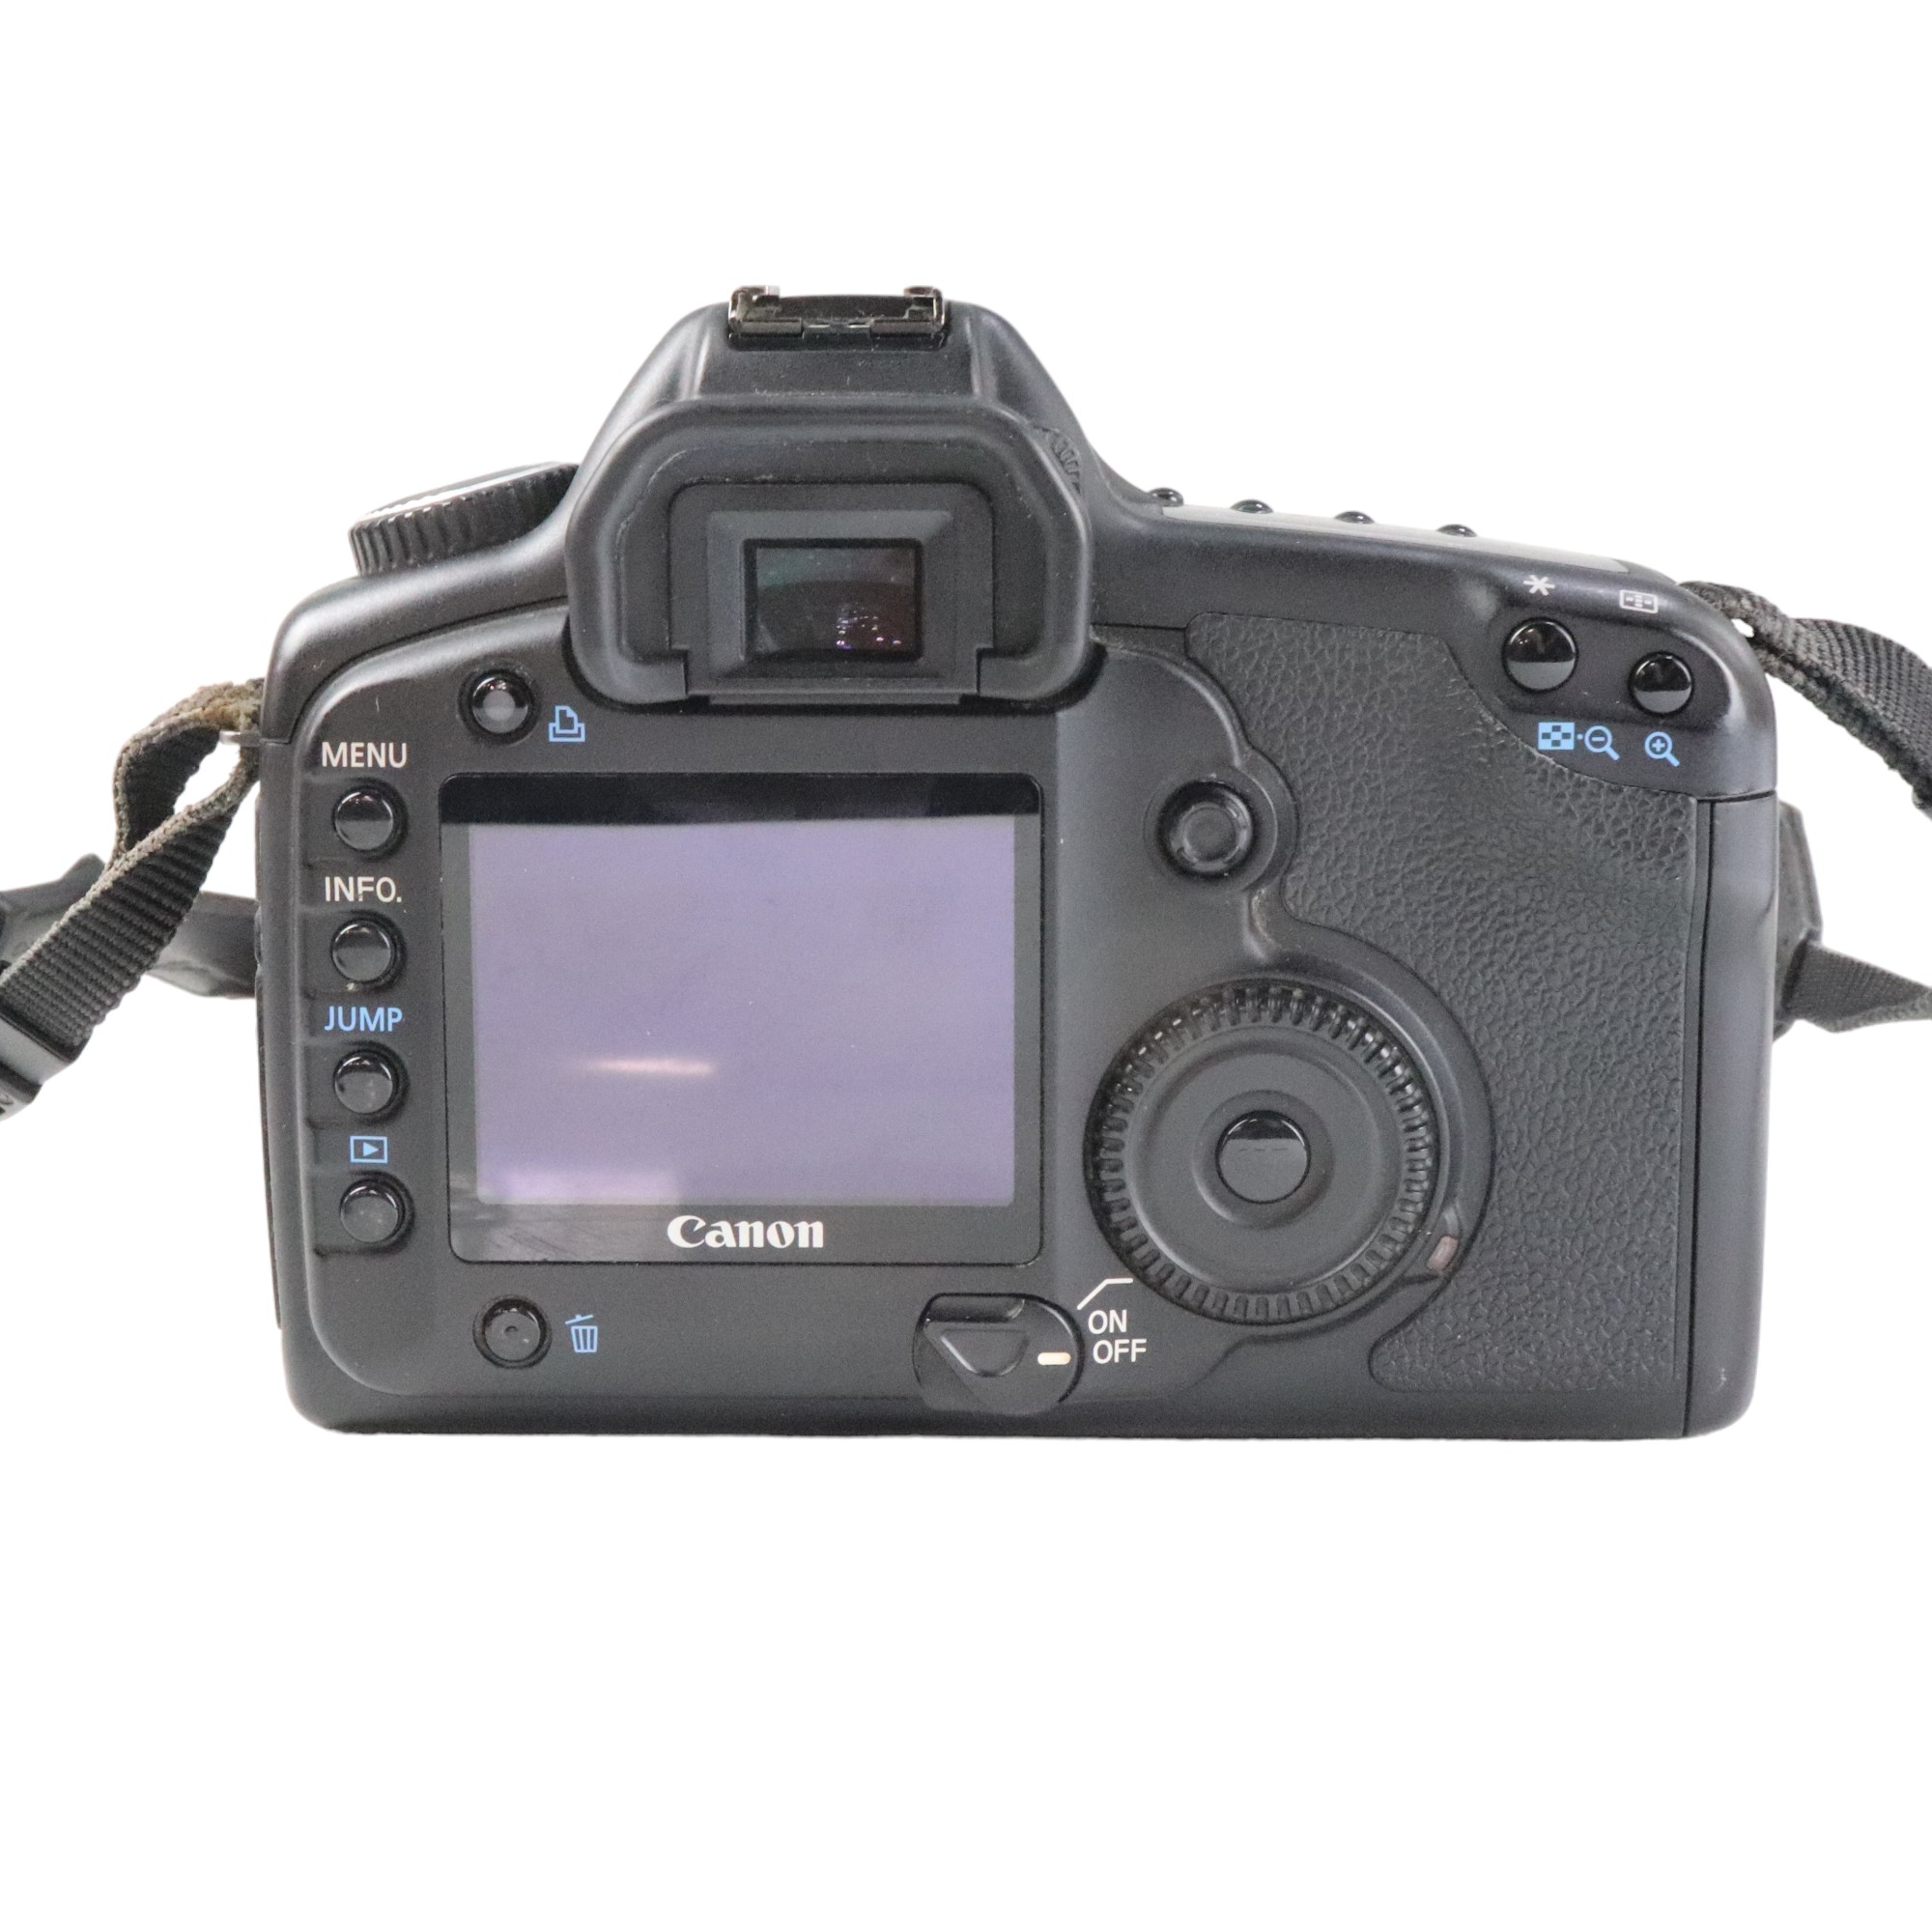 A Canon EOS 5D digital single-lens reflex camera mounted with an Ultrasonic Canon Zoom EF 28-70mm - Image 13 of 13